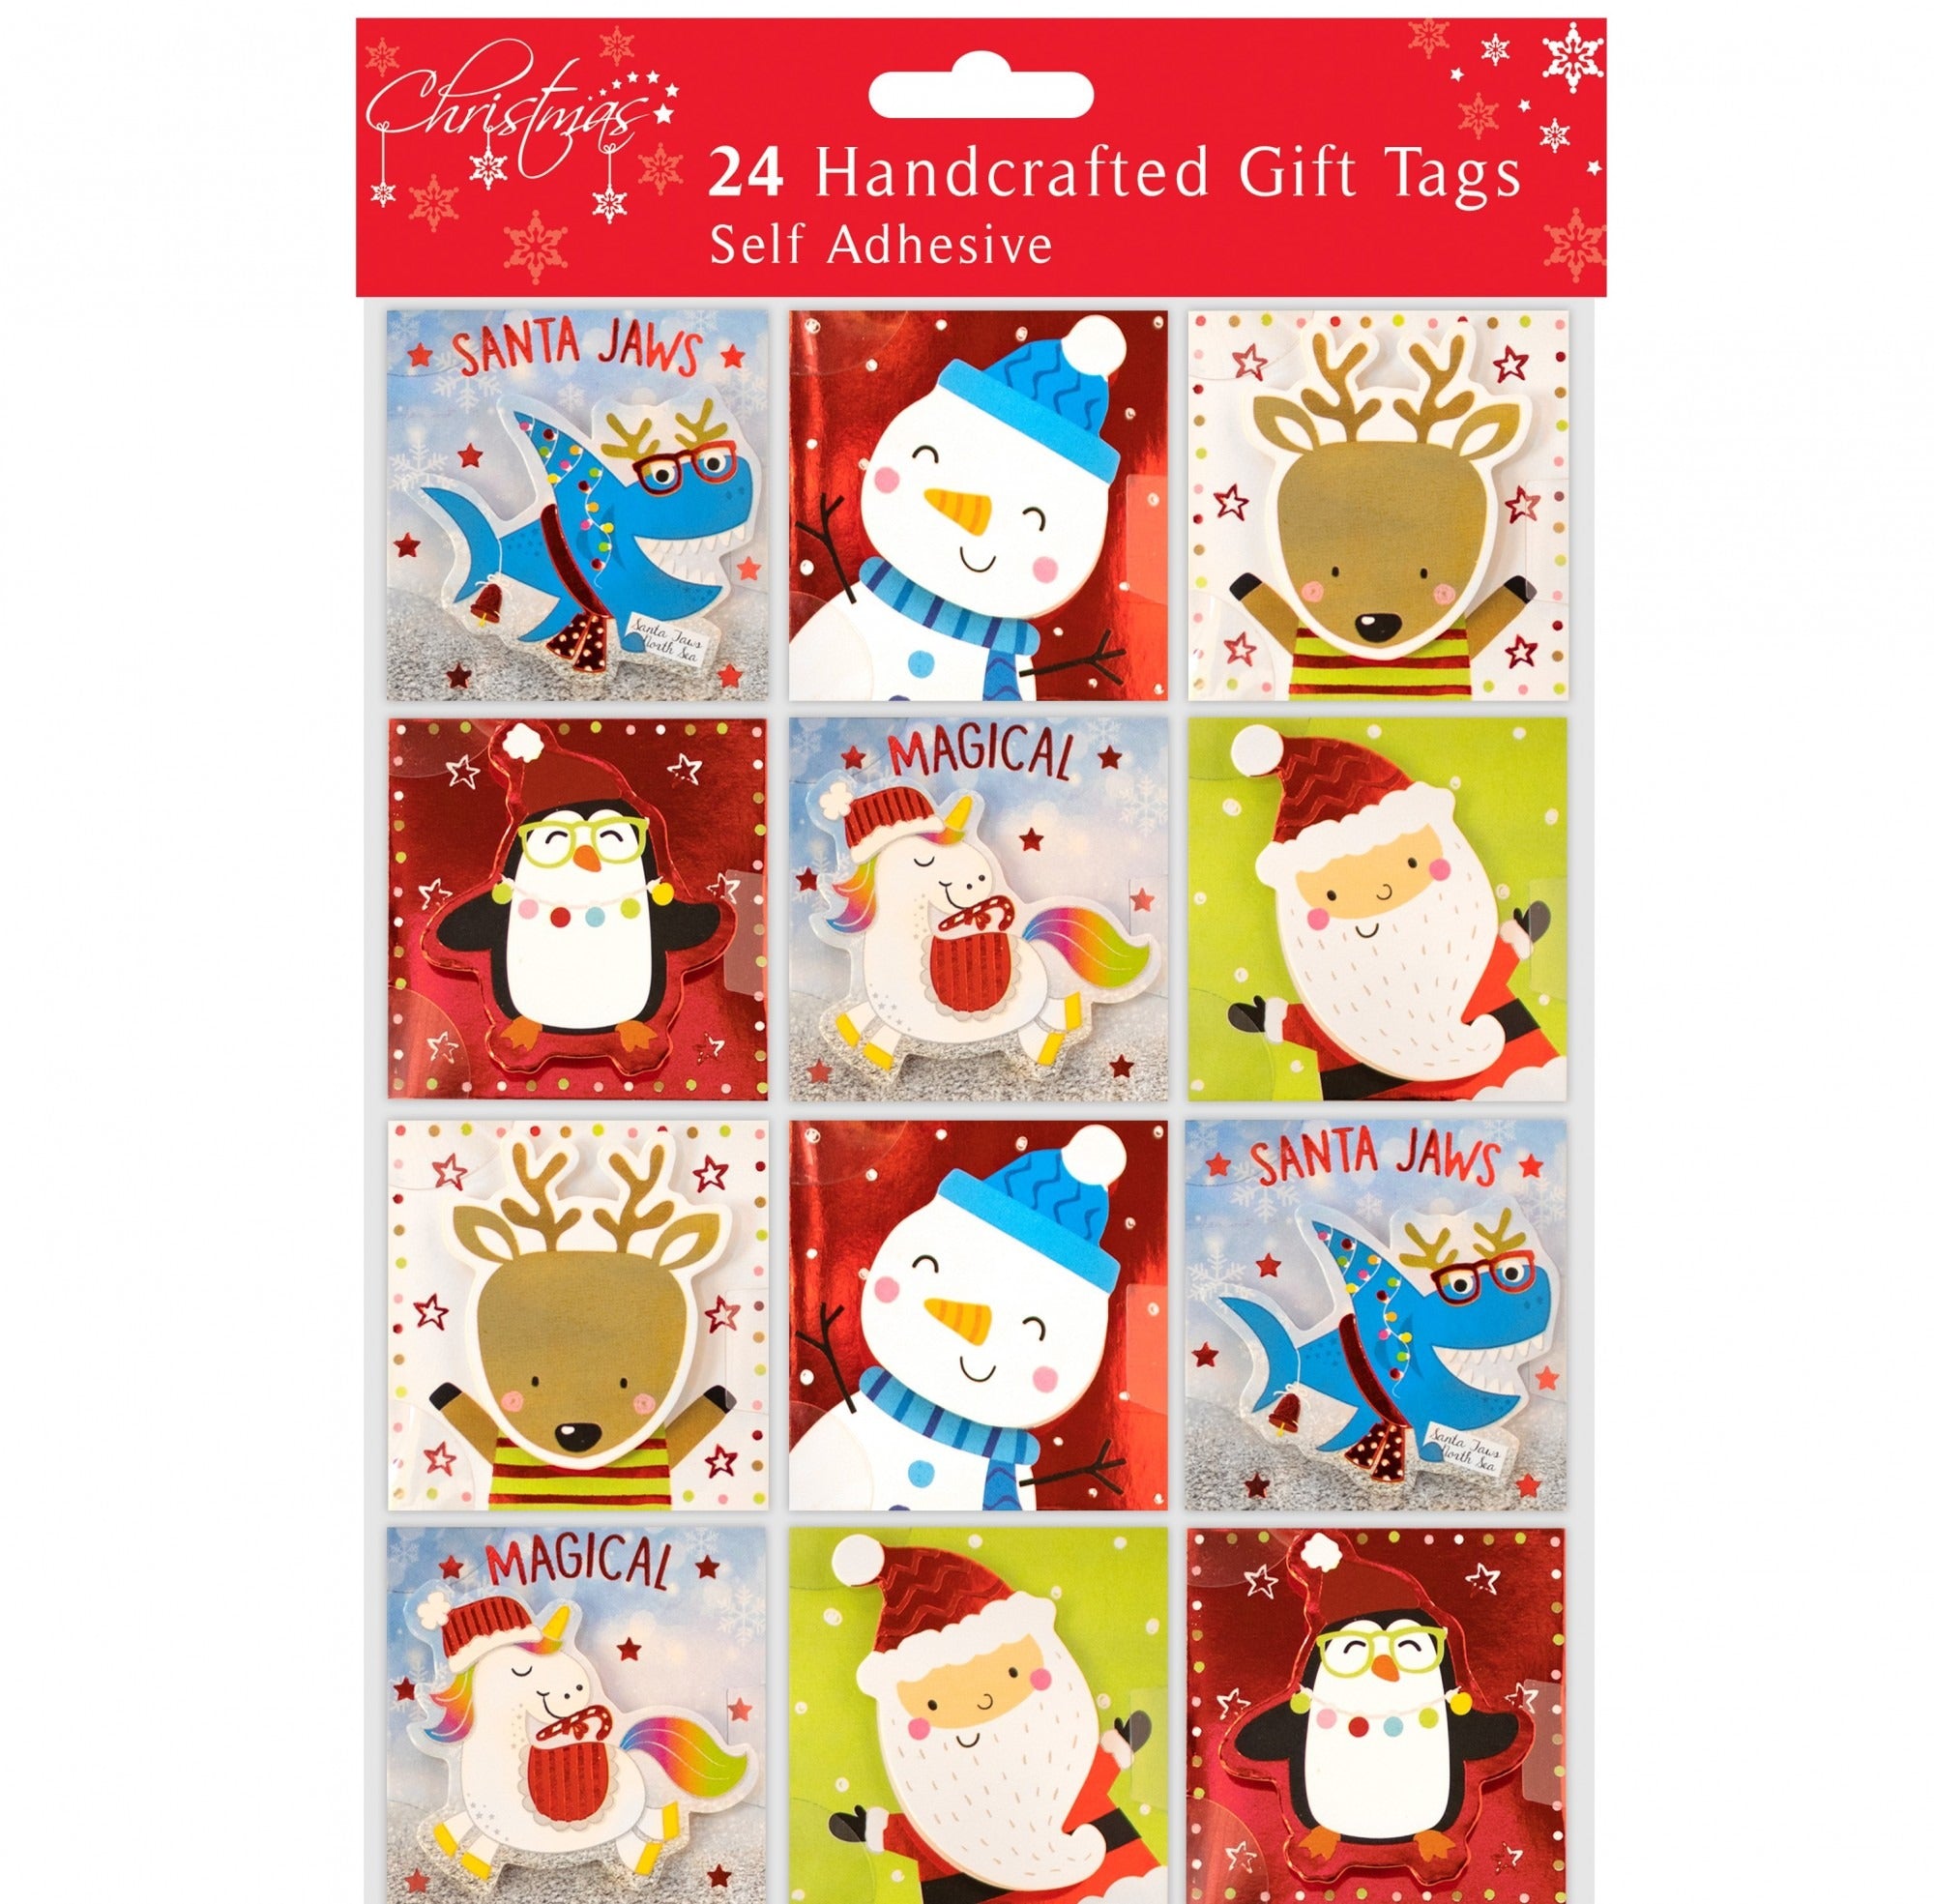 View Festive Gift Tags information